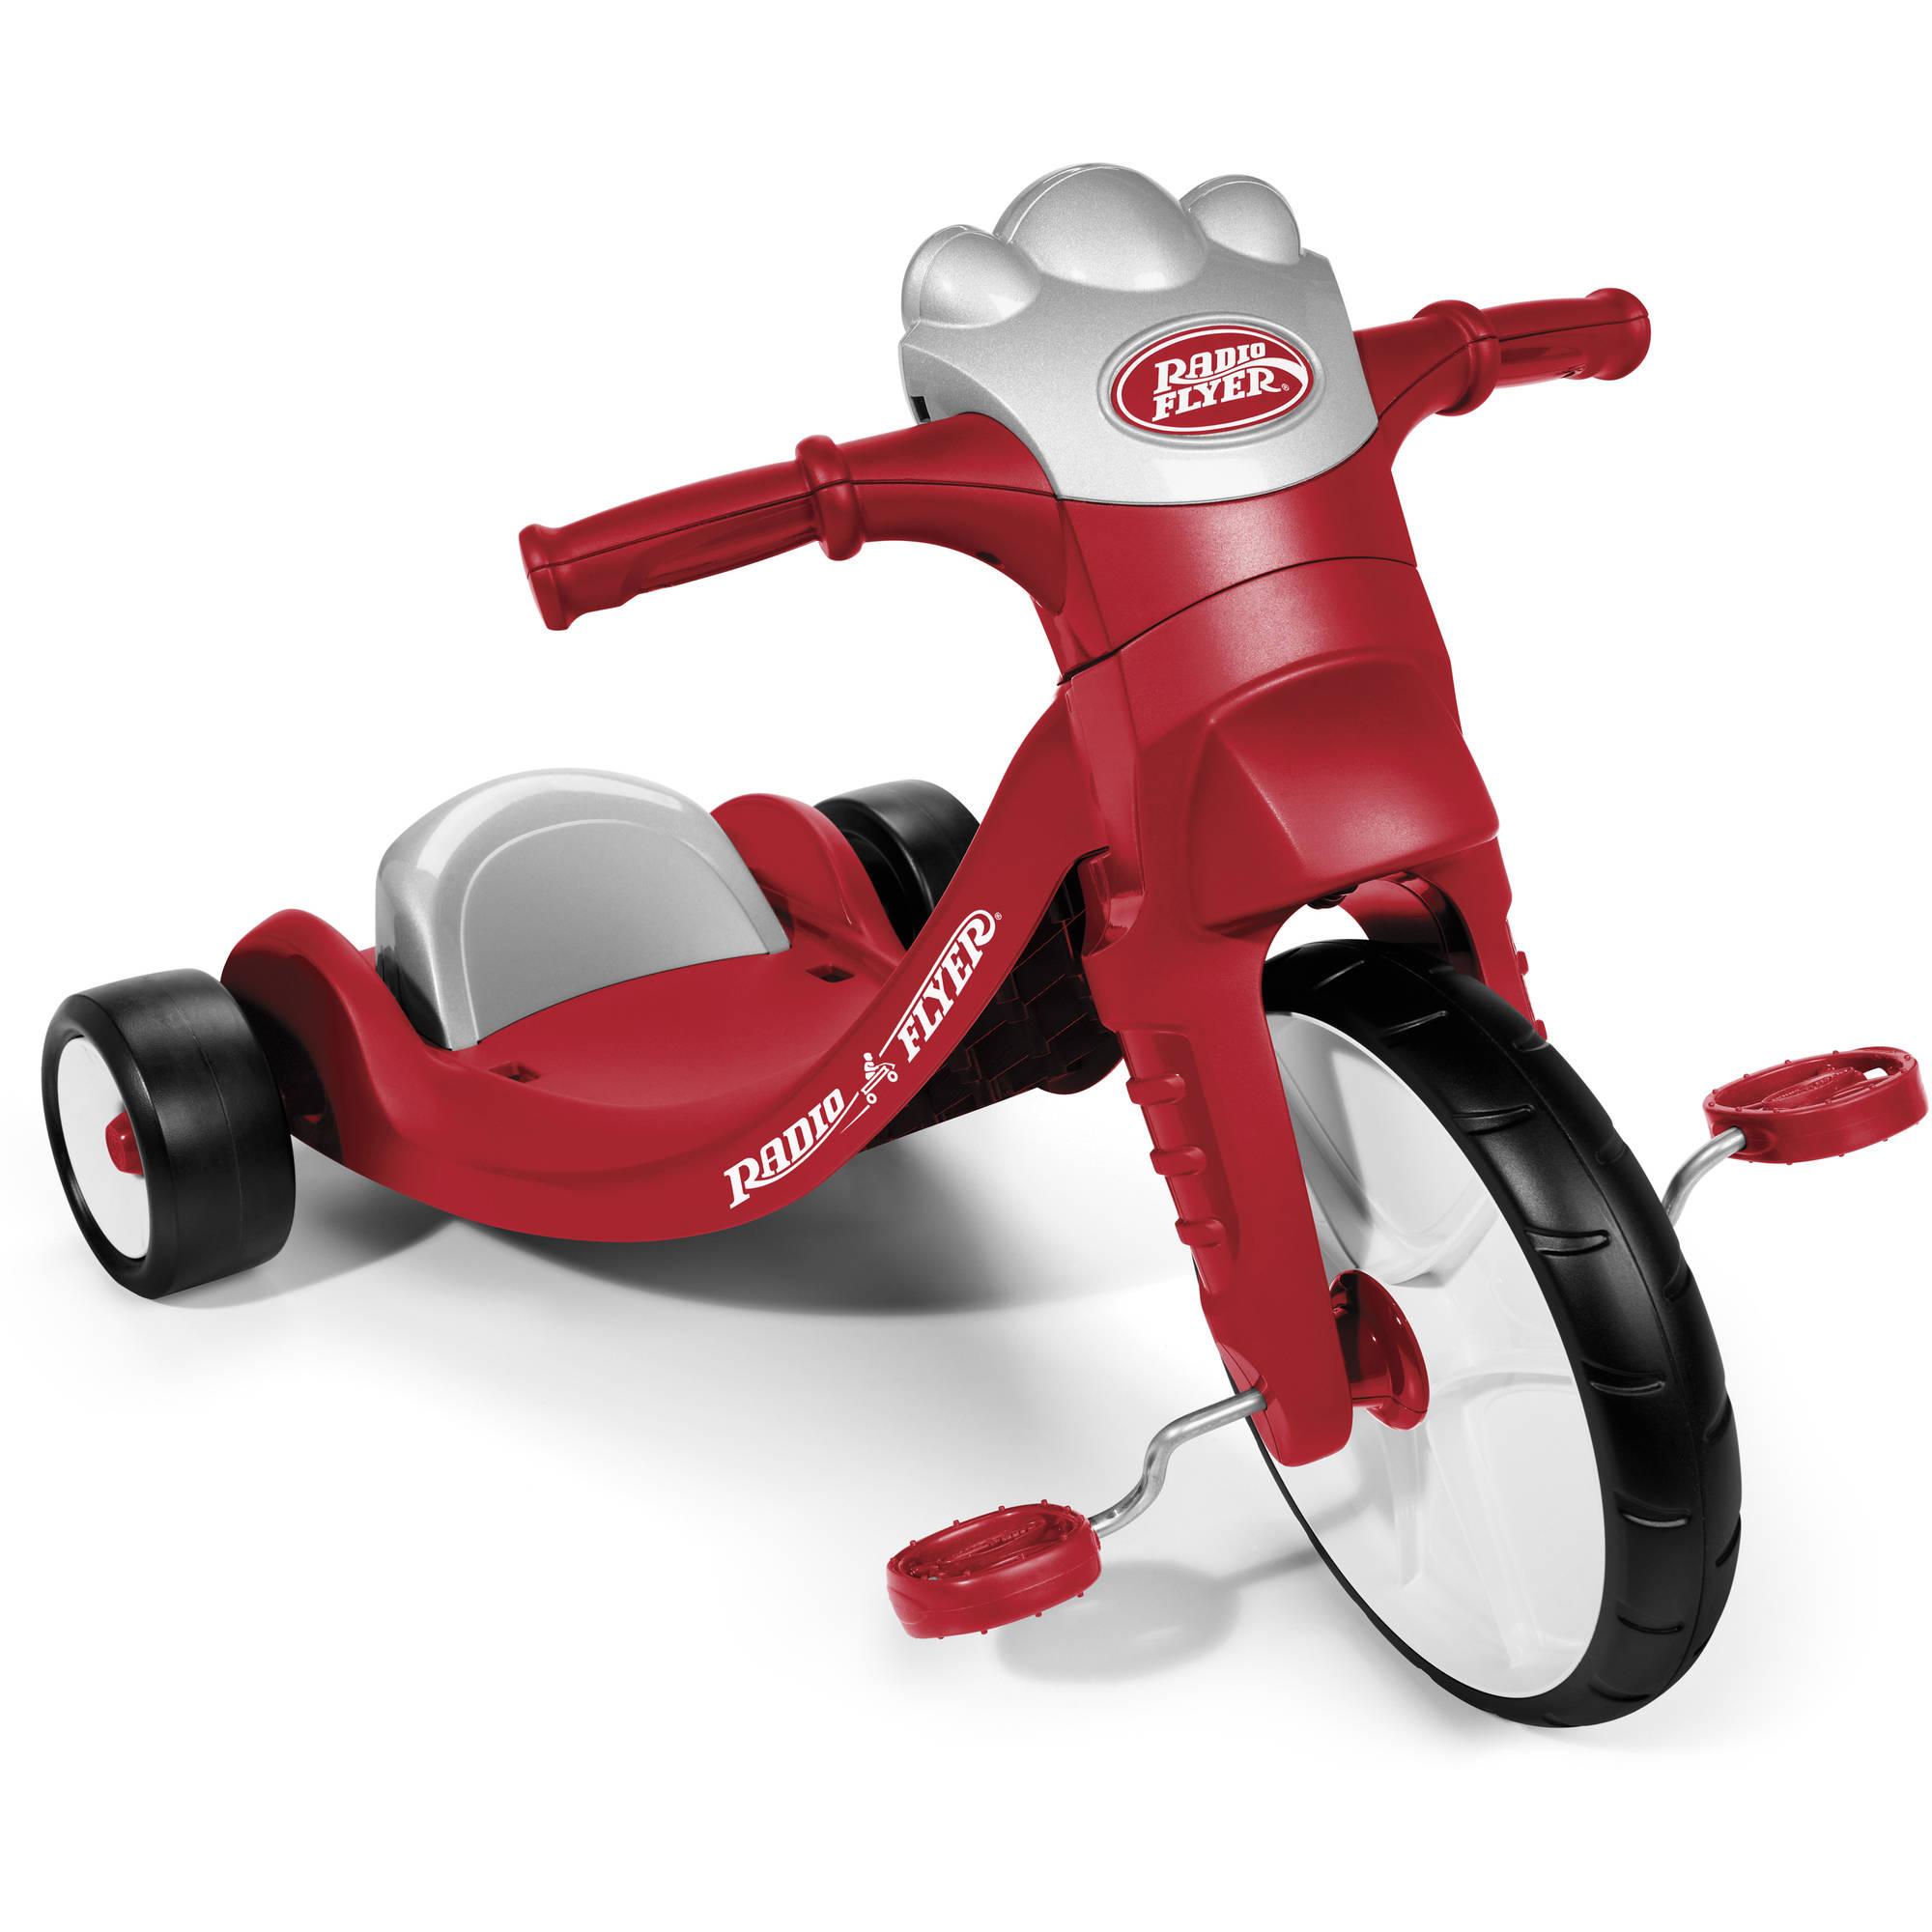 Radio Flyer, Lights & Sounds Racer, Red Tricycle for Girls and Boys - image 2 of 9